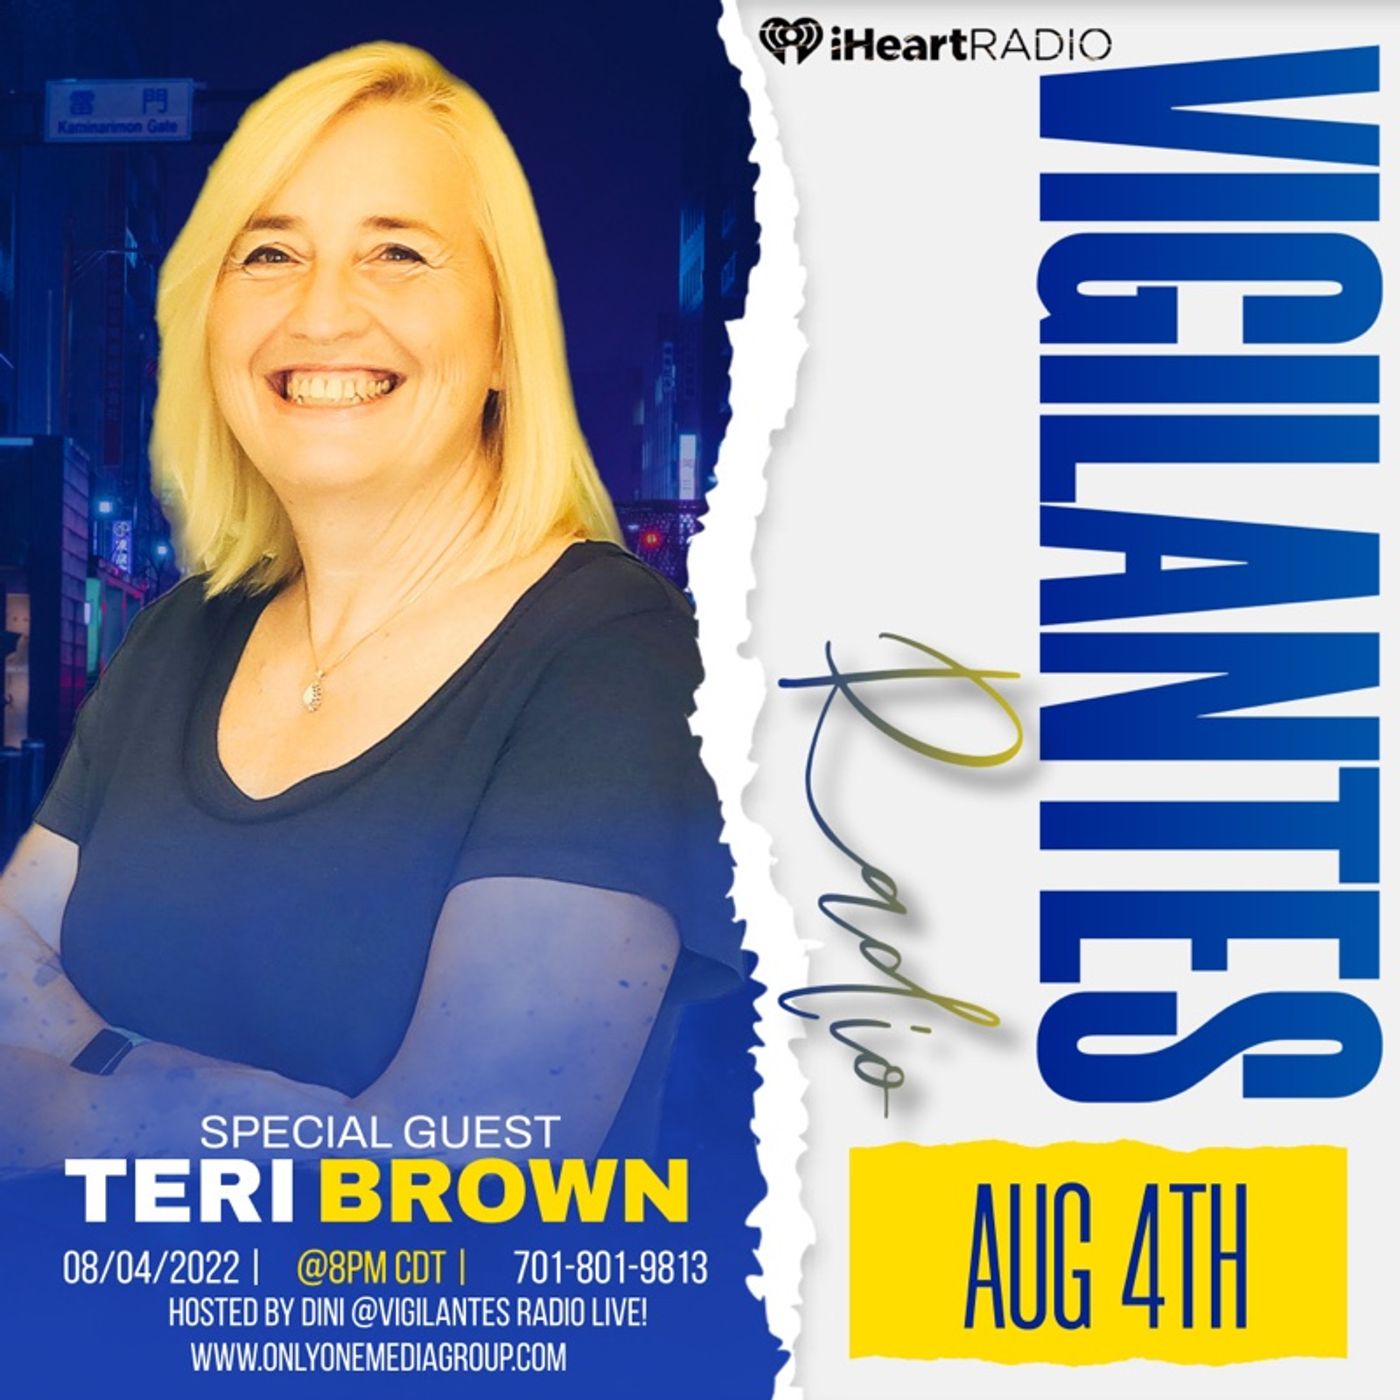 The Teri Brown Interview. Image